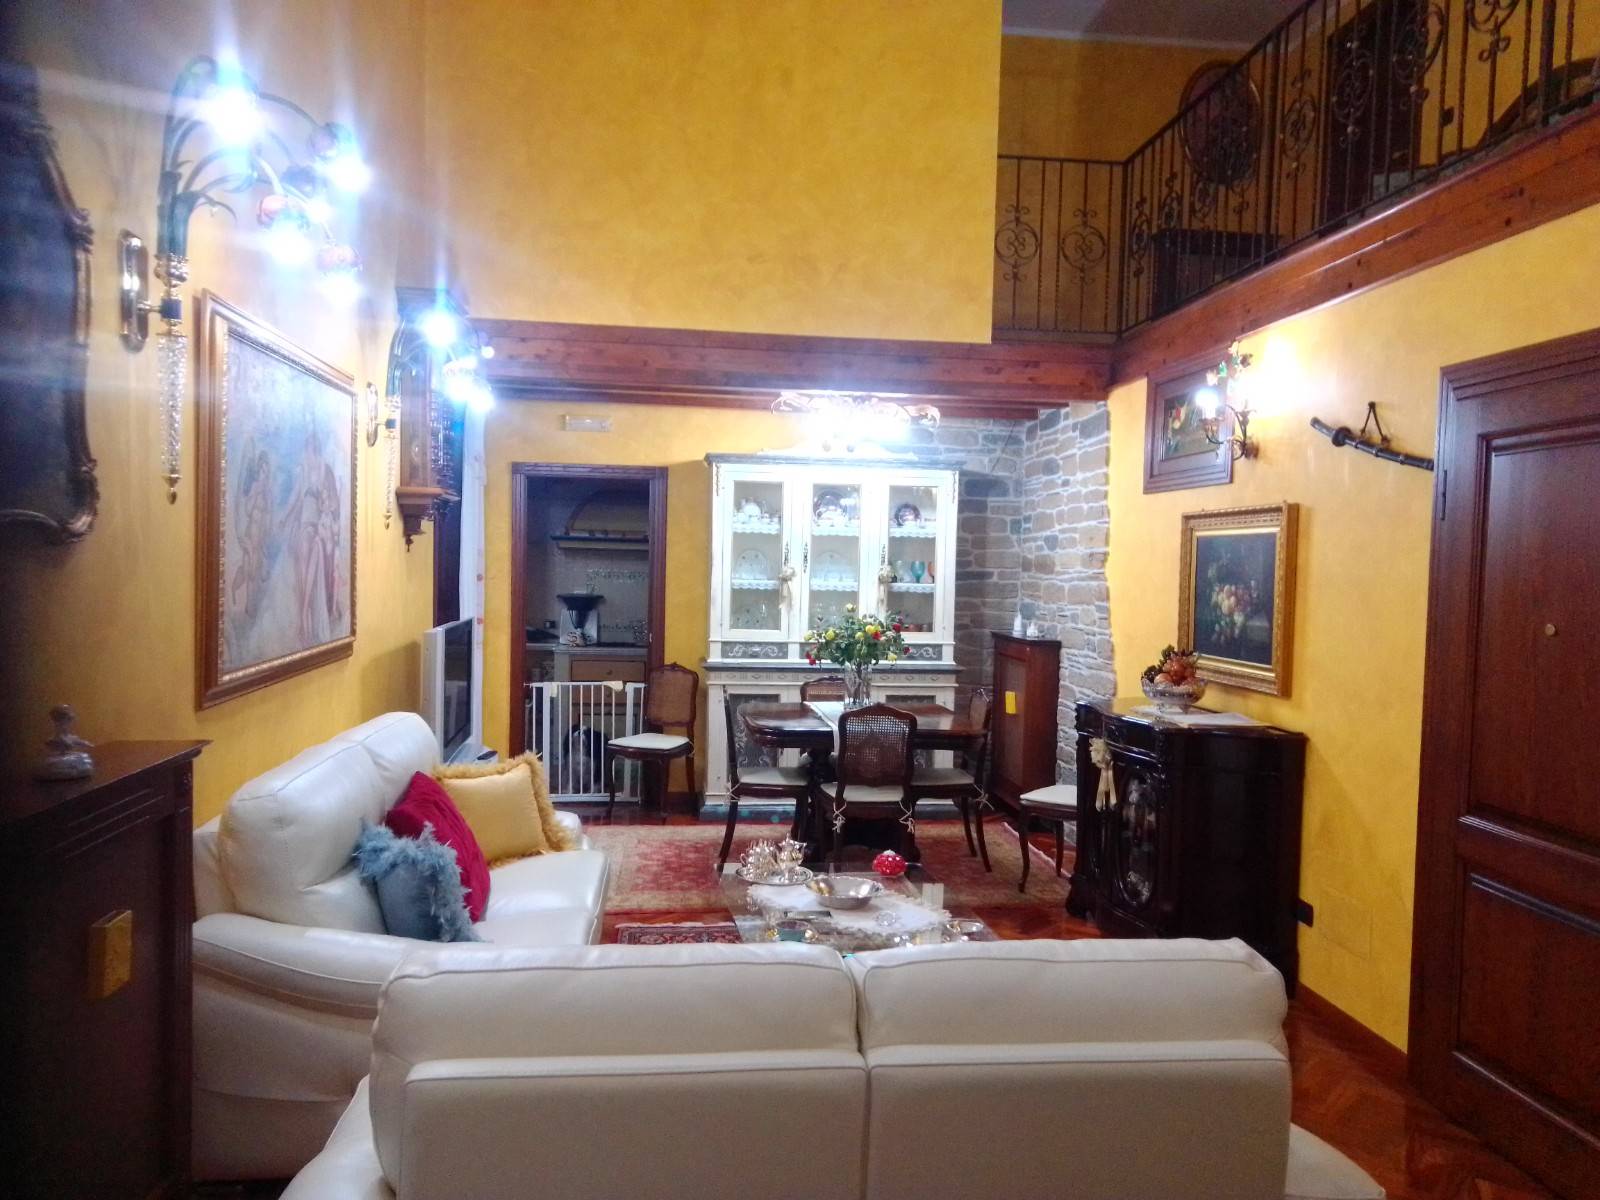 CENTRO, LICATA, Apartment for sale of 200 Sq. mt., Excellent Condition, Heating Individual heating system, Energetic class: G, composed by: 5 Rooms, 